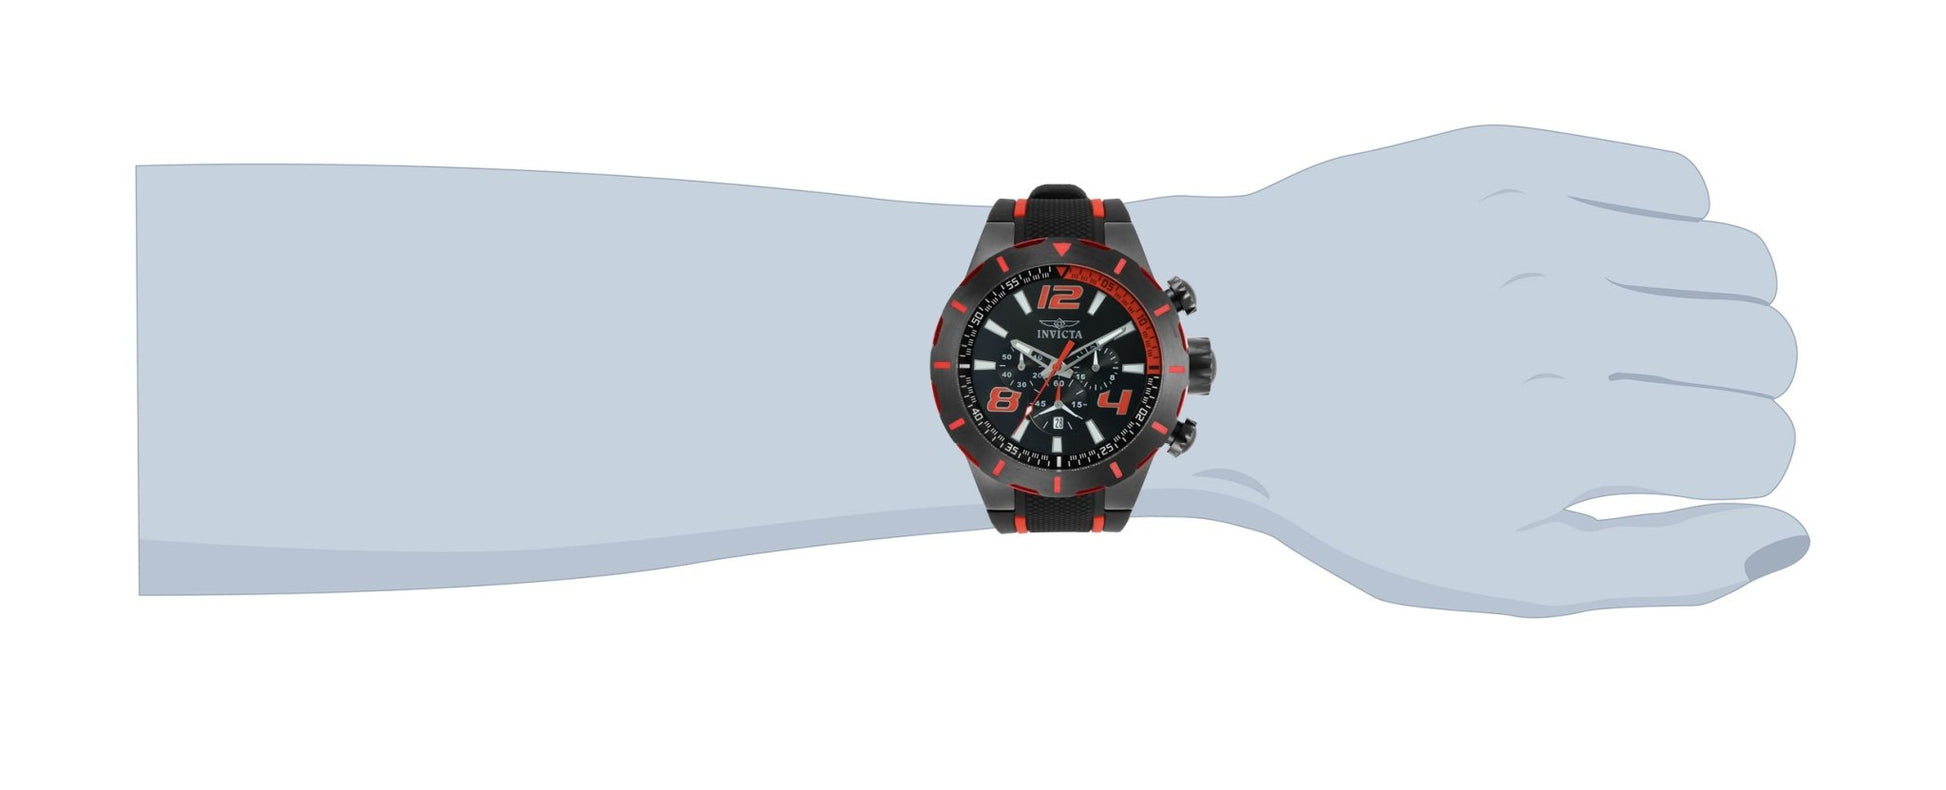 Invicta S1 Rally 20109 chronograph watch with black and red silicone strap worn on wrist